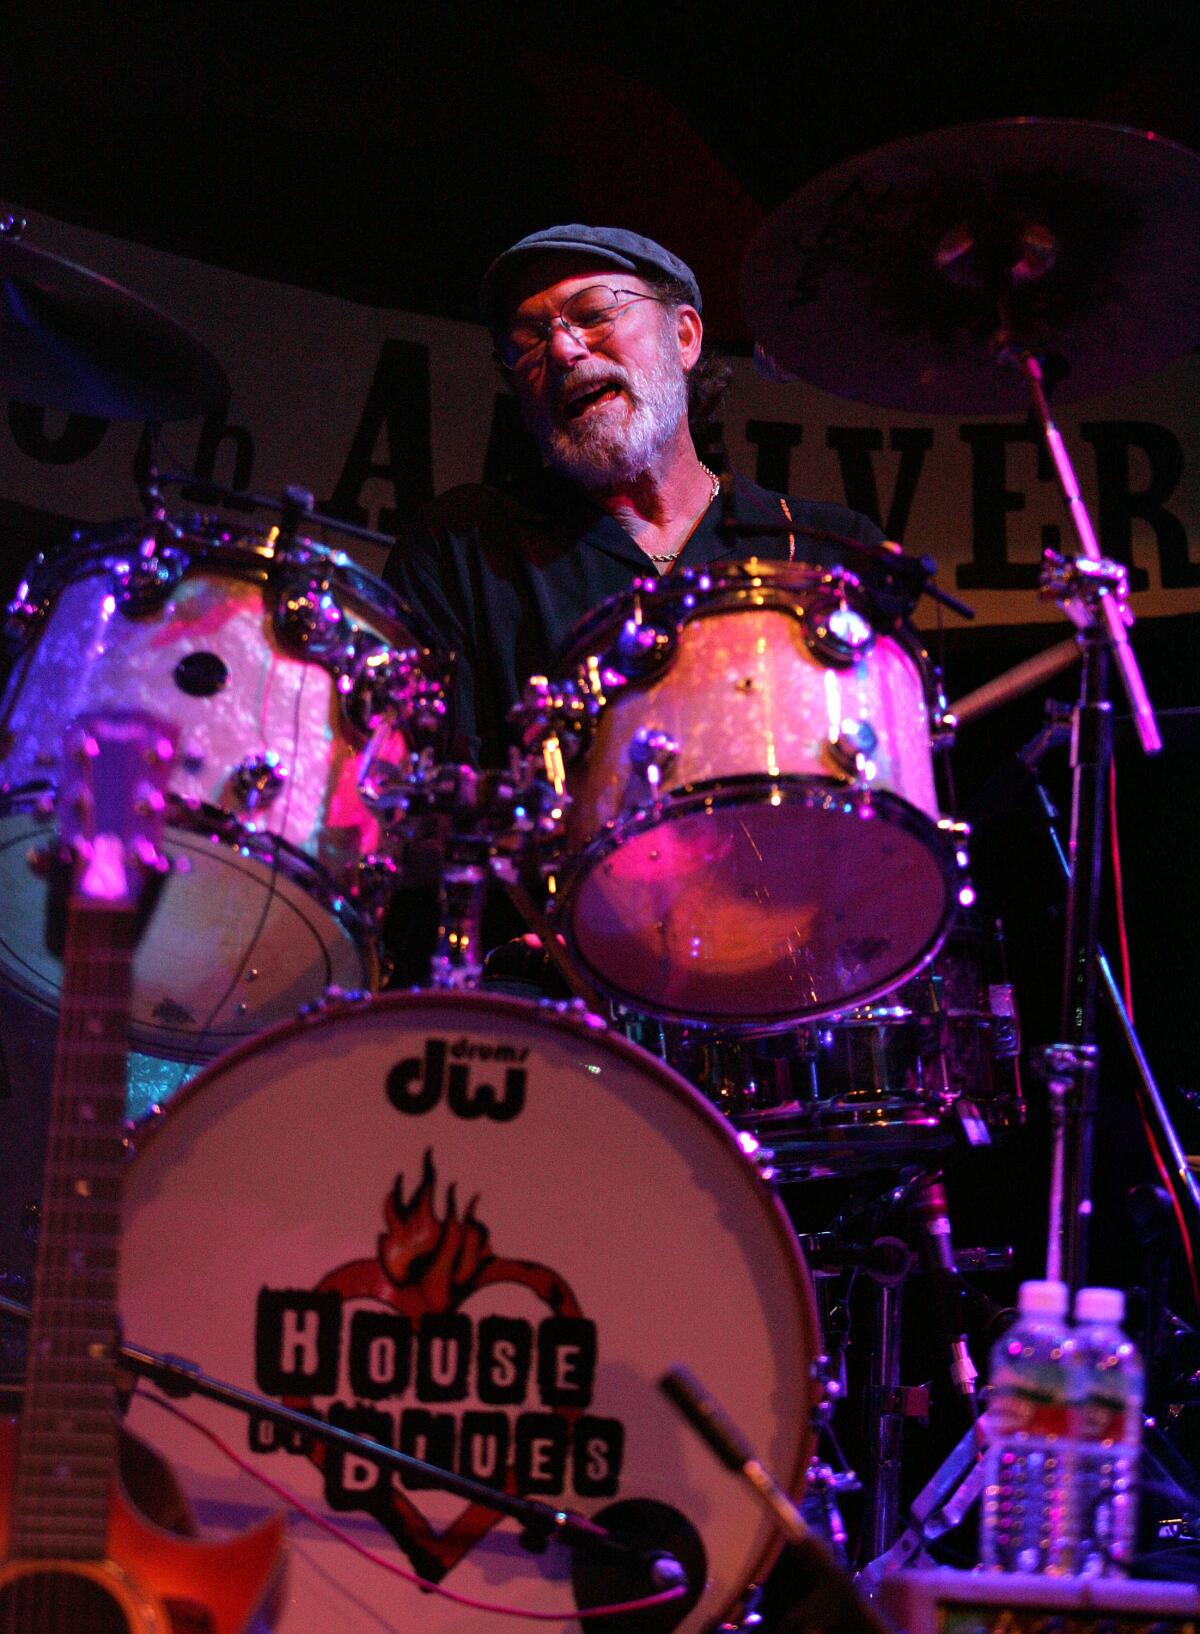 A bearded man plays the drums